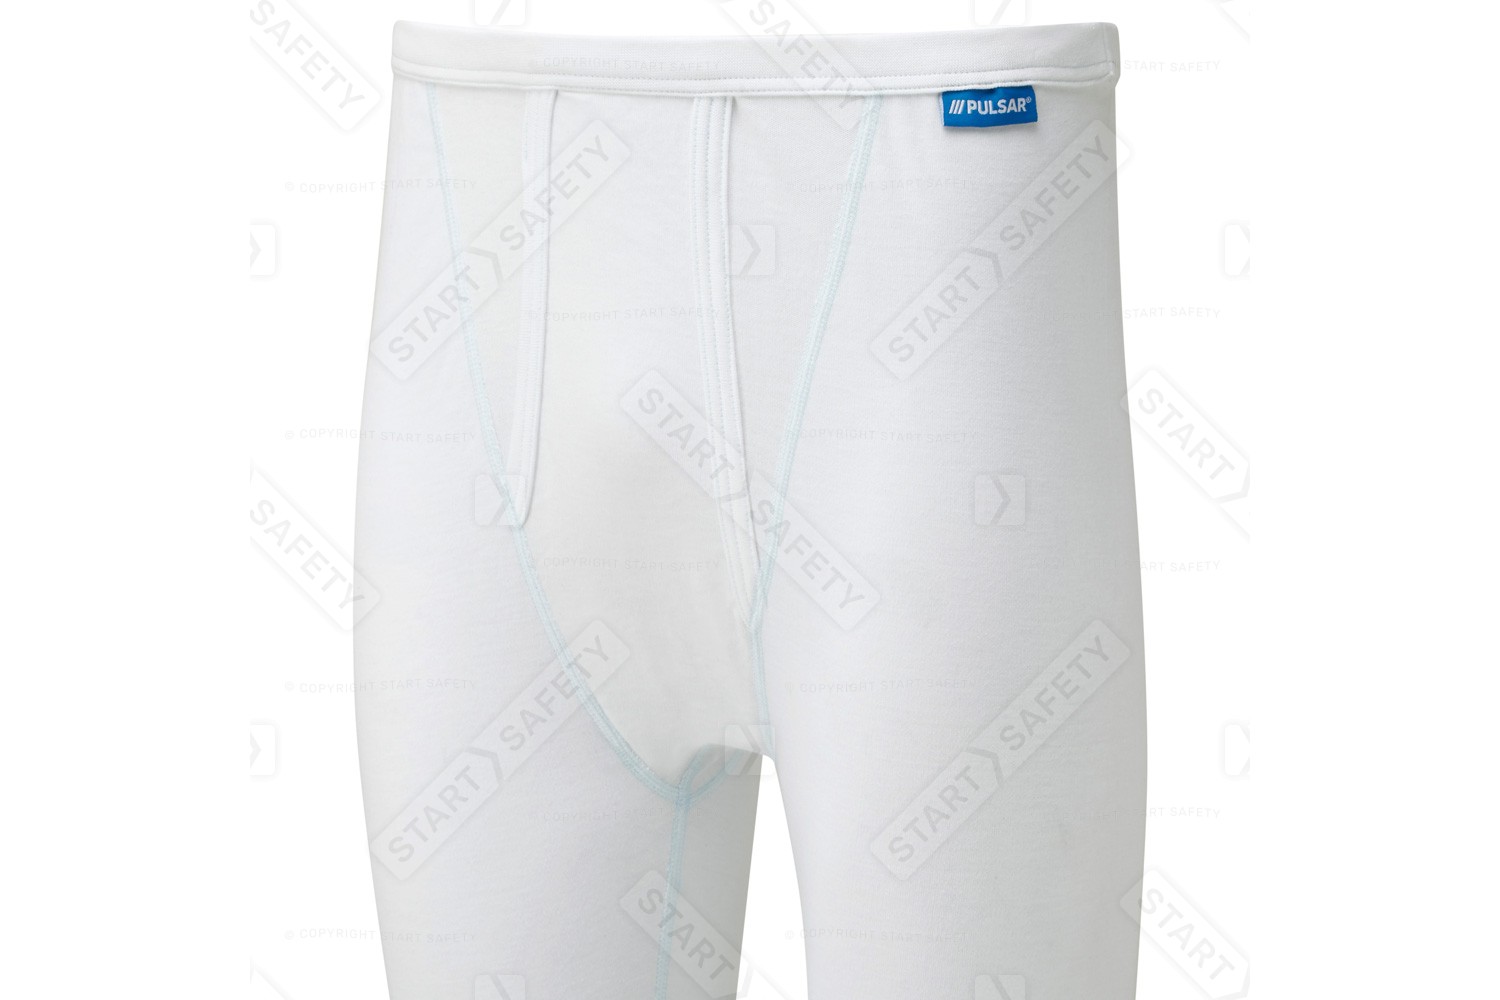 Mens Thermal Pants, White Detail Of Fabric